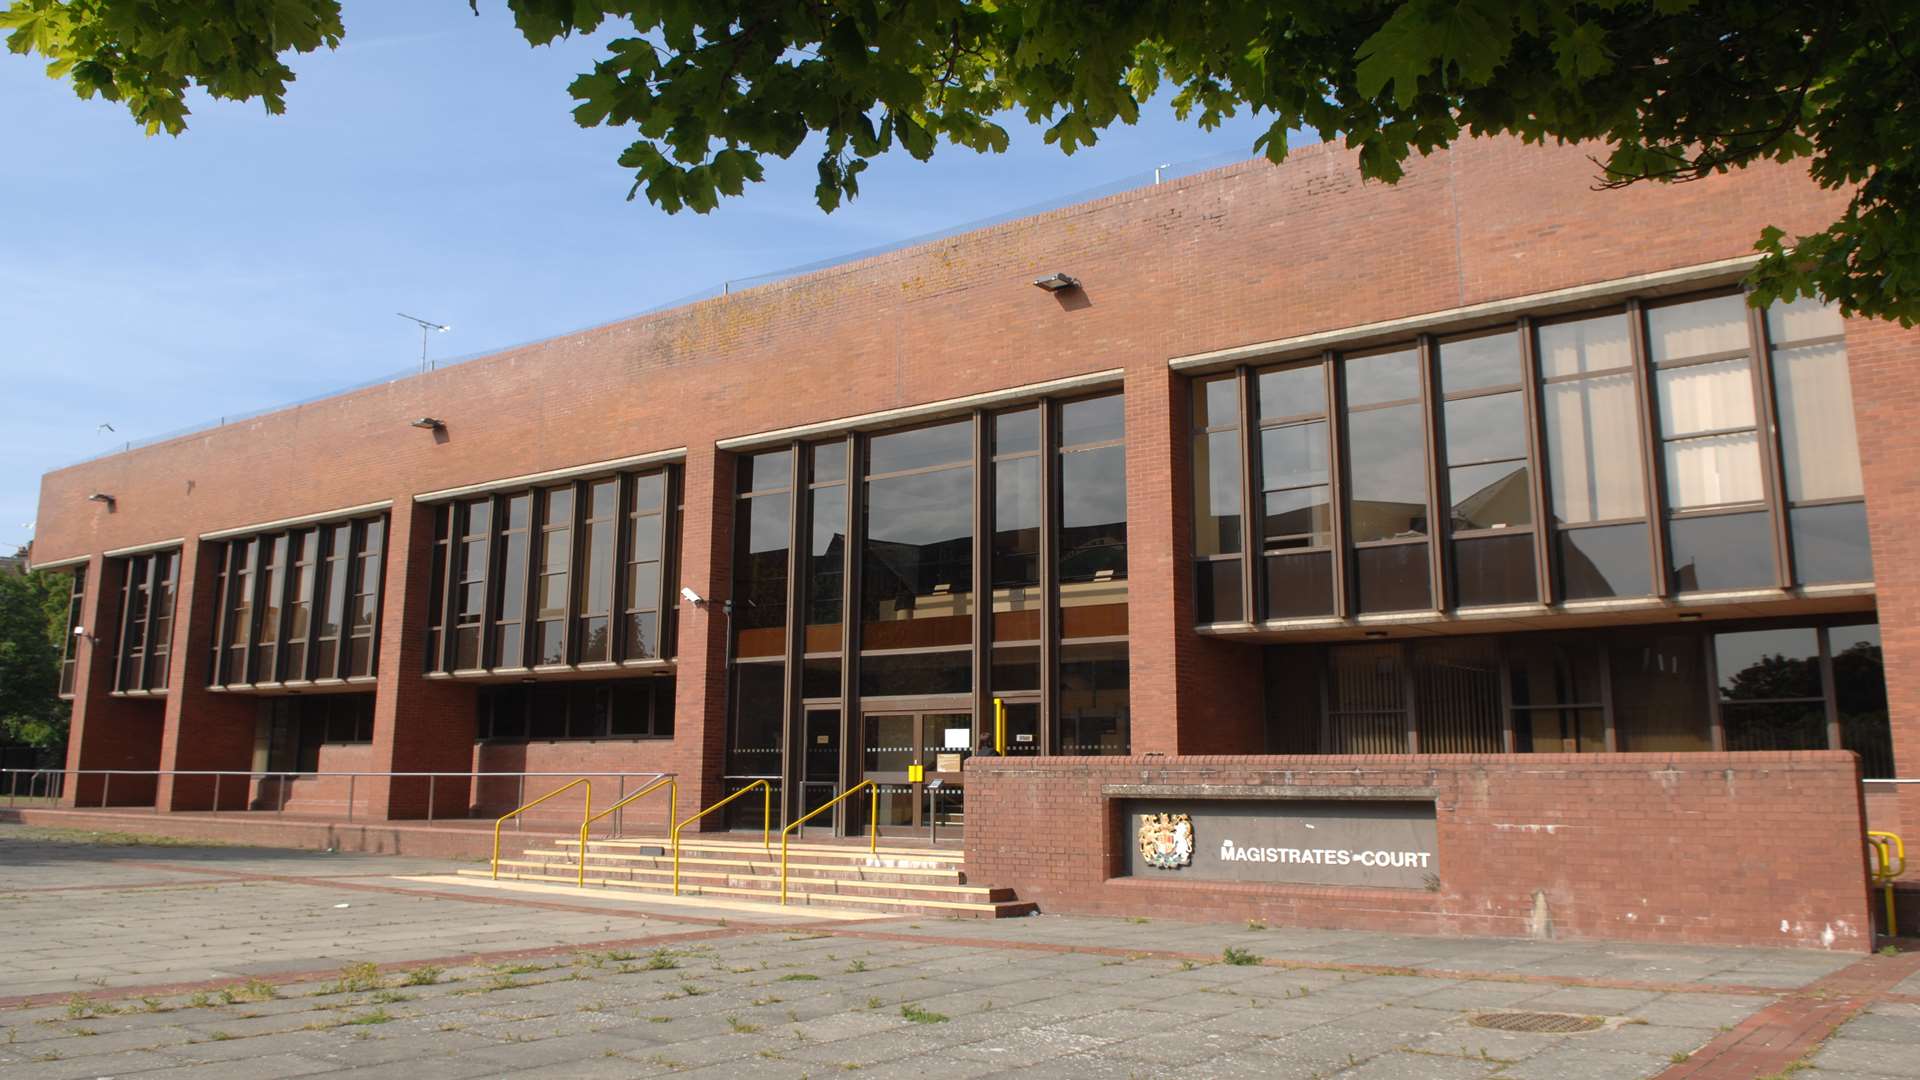 The inquest was held at Folkestone Magistrates' Court